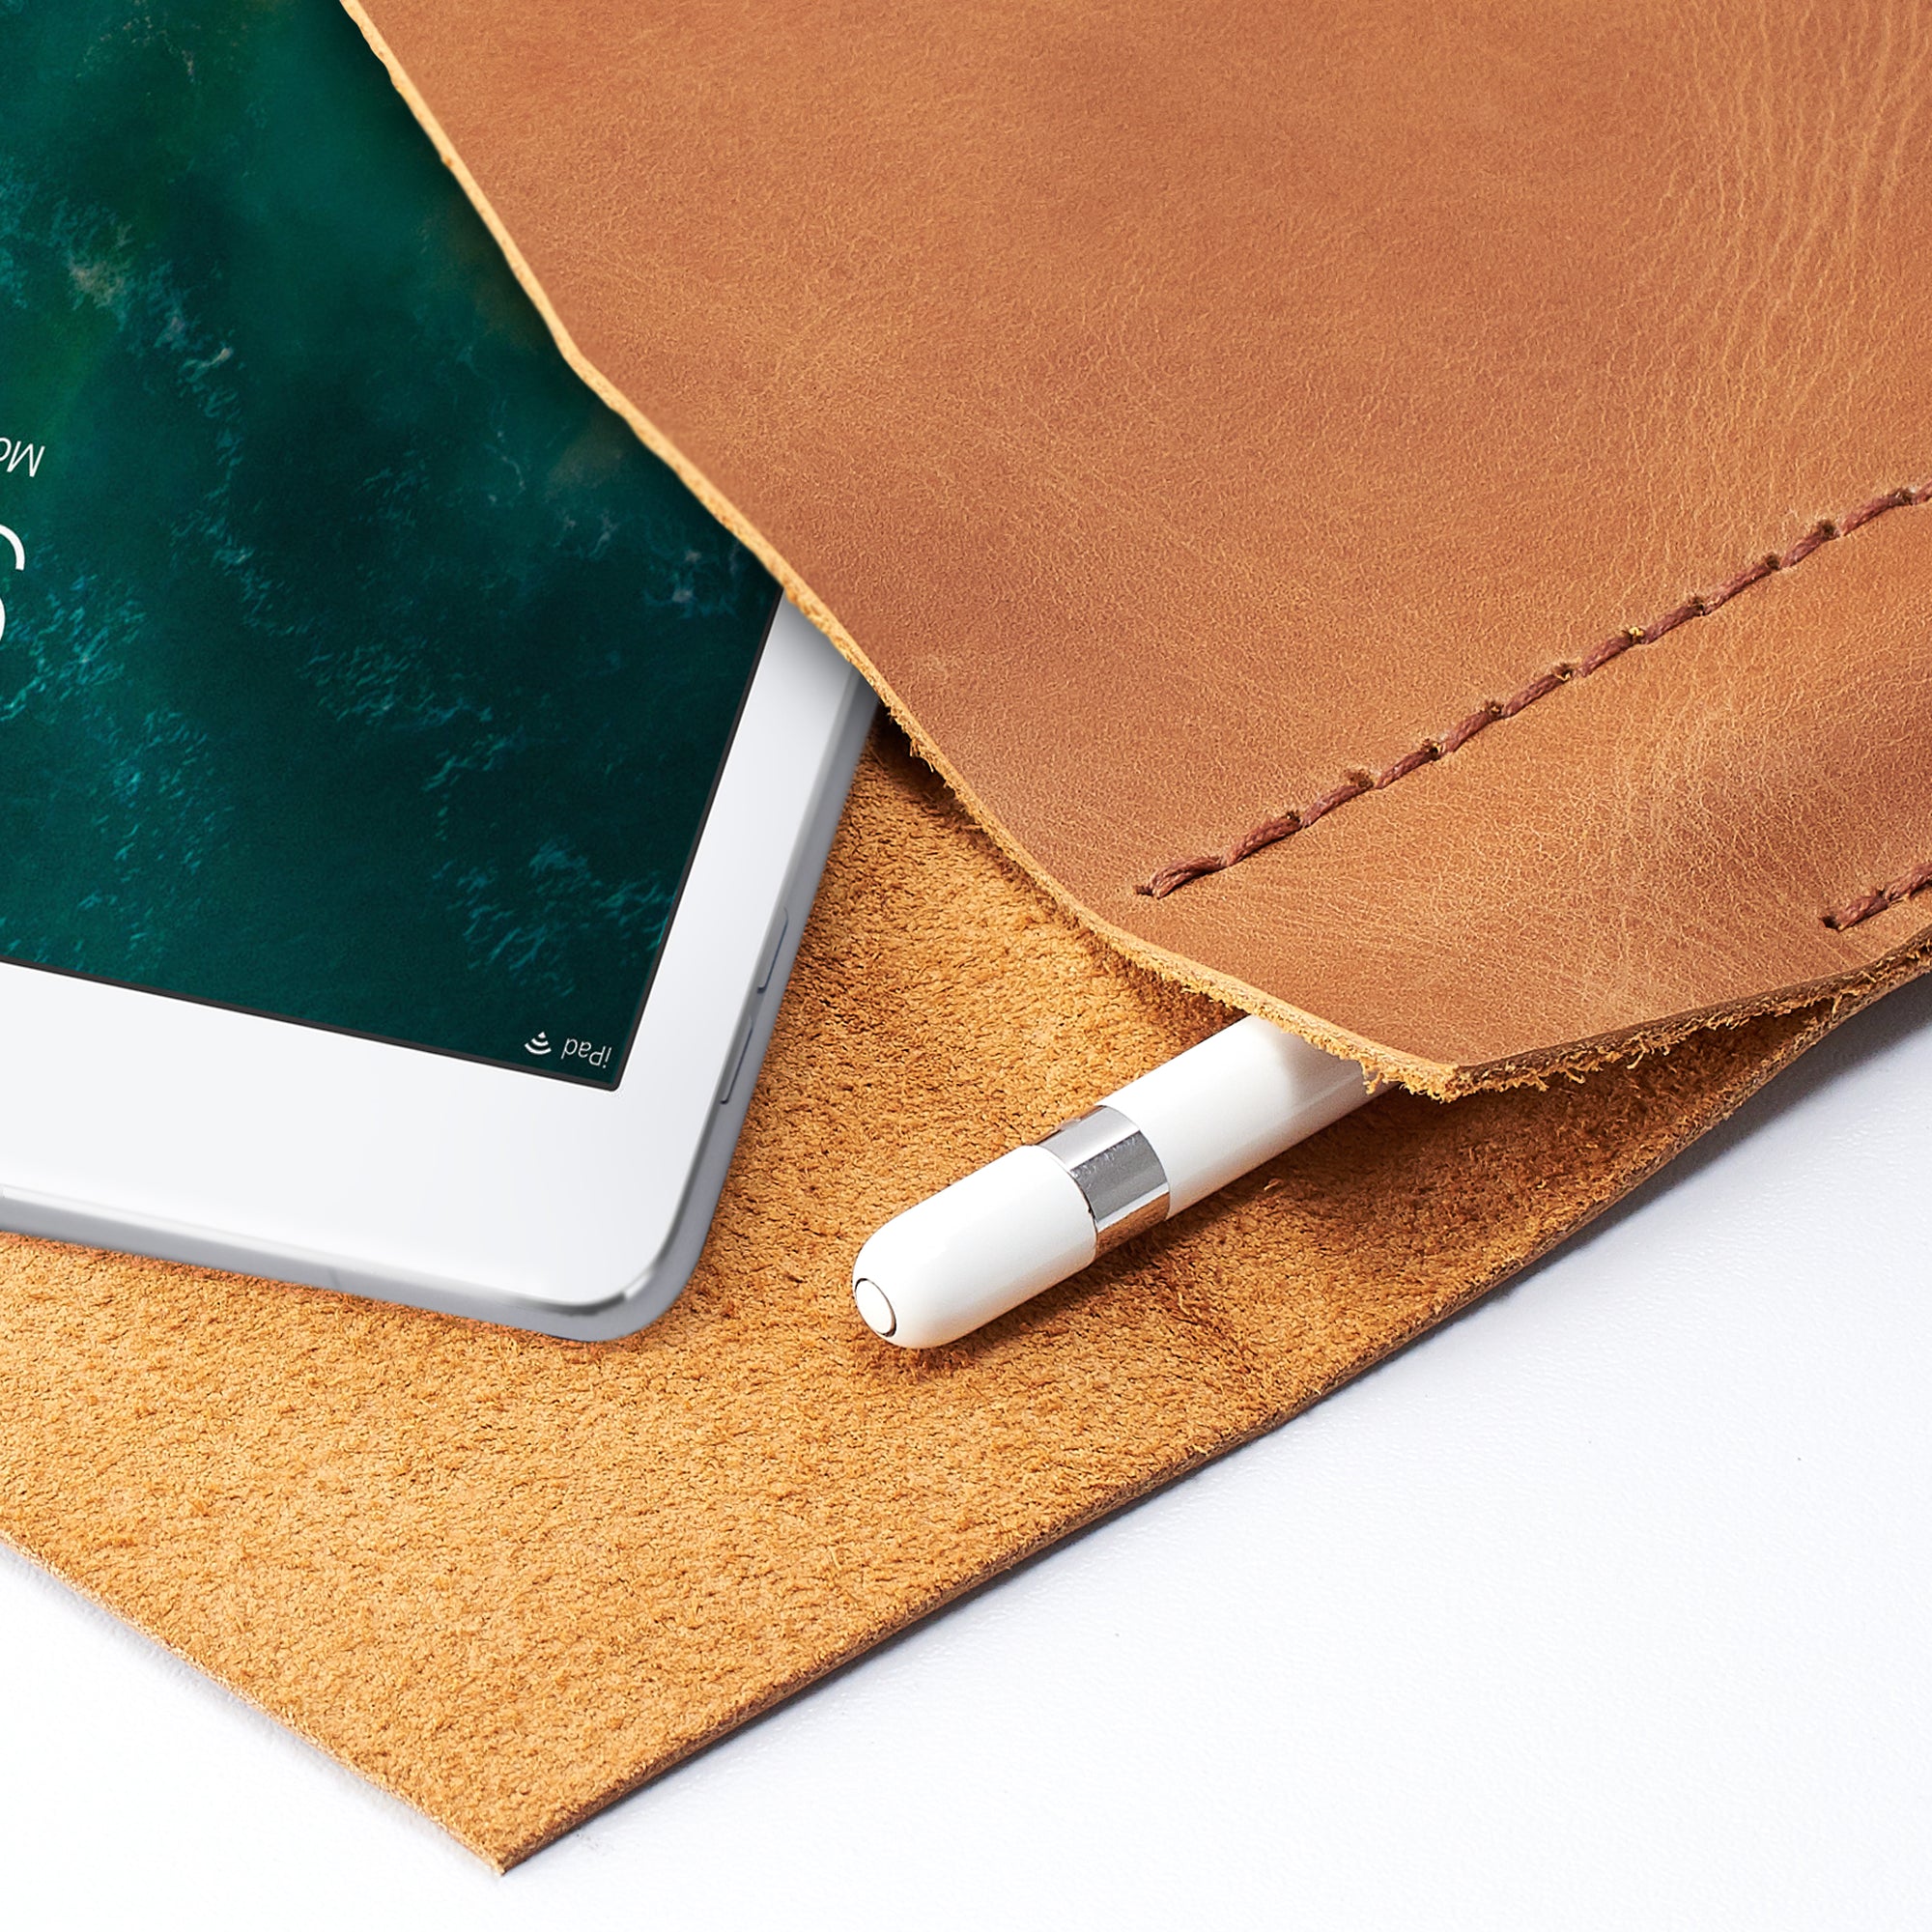 Apple pencil holder. Light brown leather sleeve for iPad pro. Case for iPad Pro 10.5 inch 12.9 inch. Mens gifts